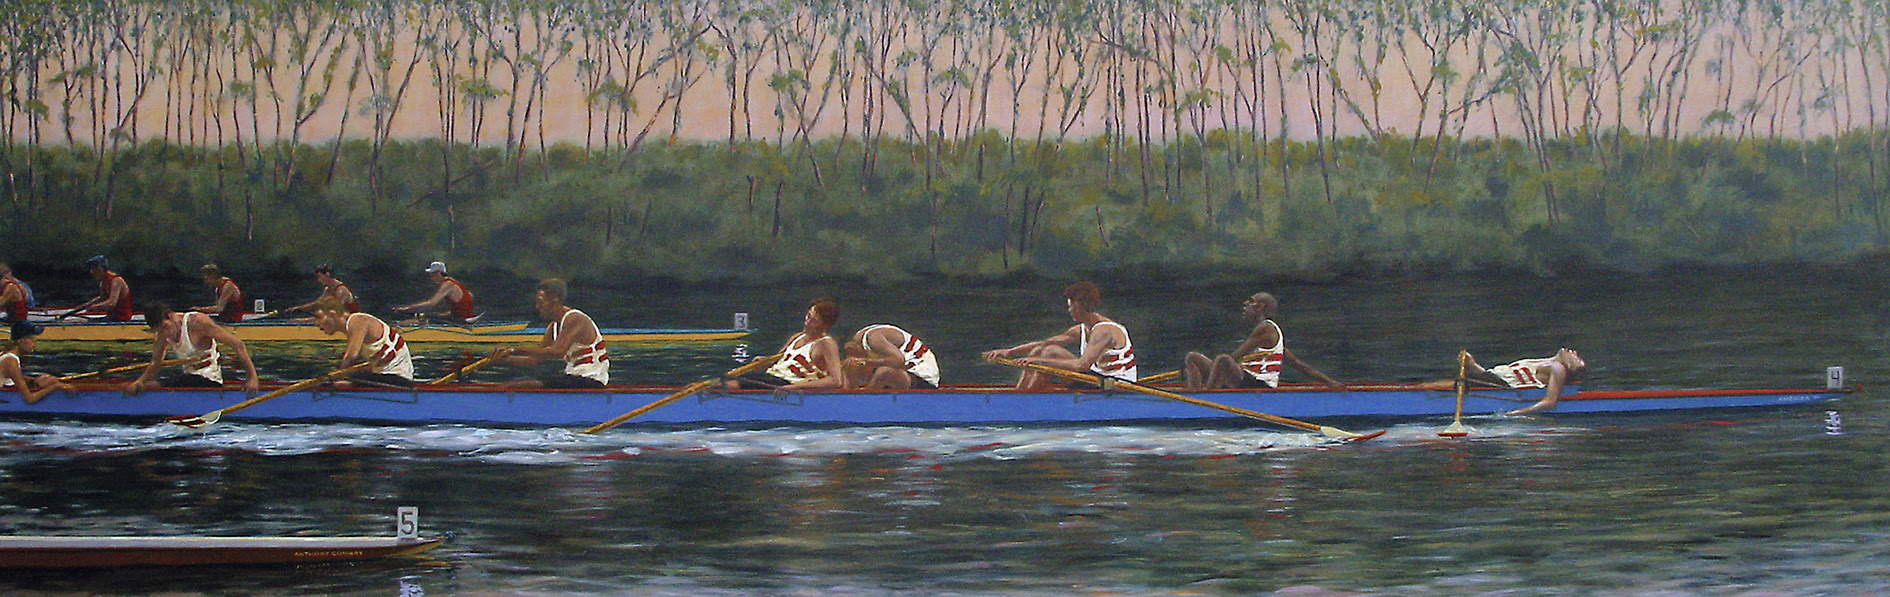 Painting of rowers just after completing a race. Rowing art by Anthony Conway.